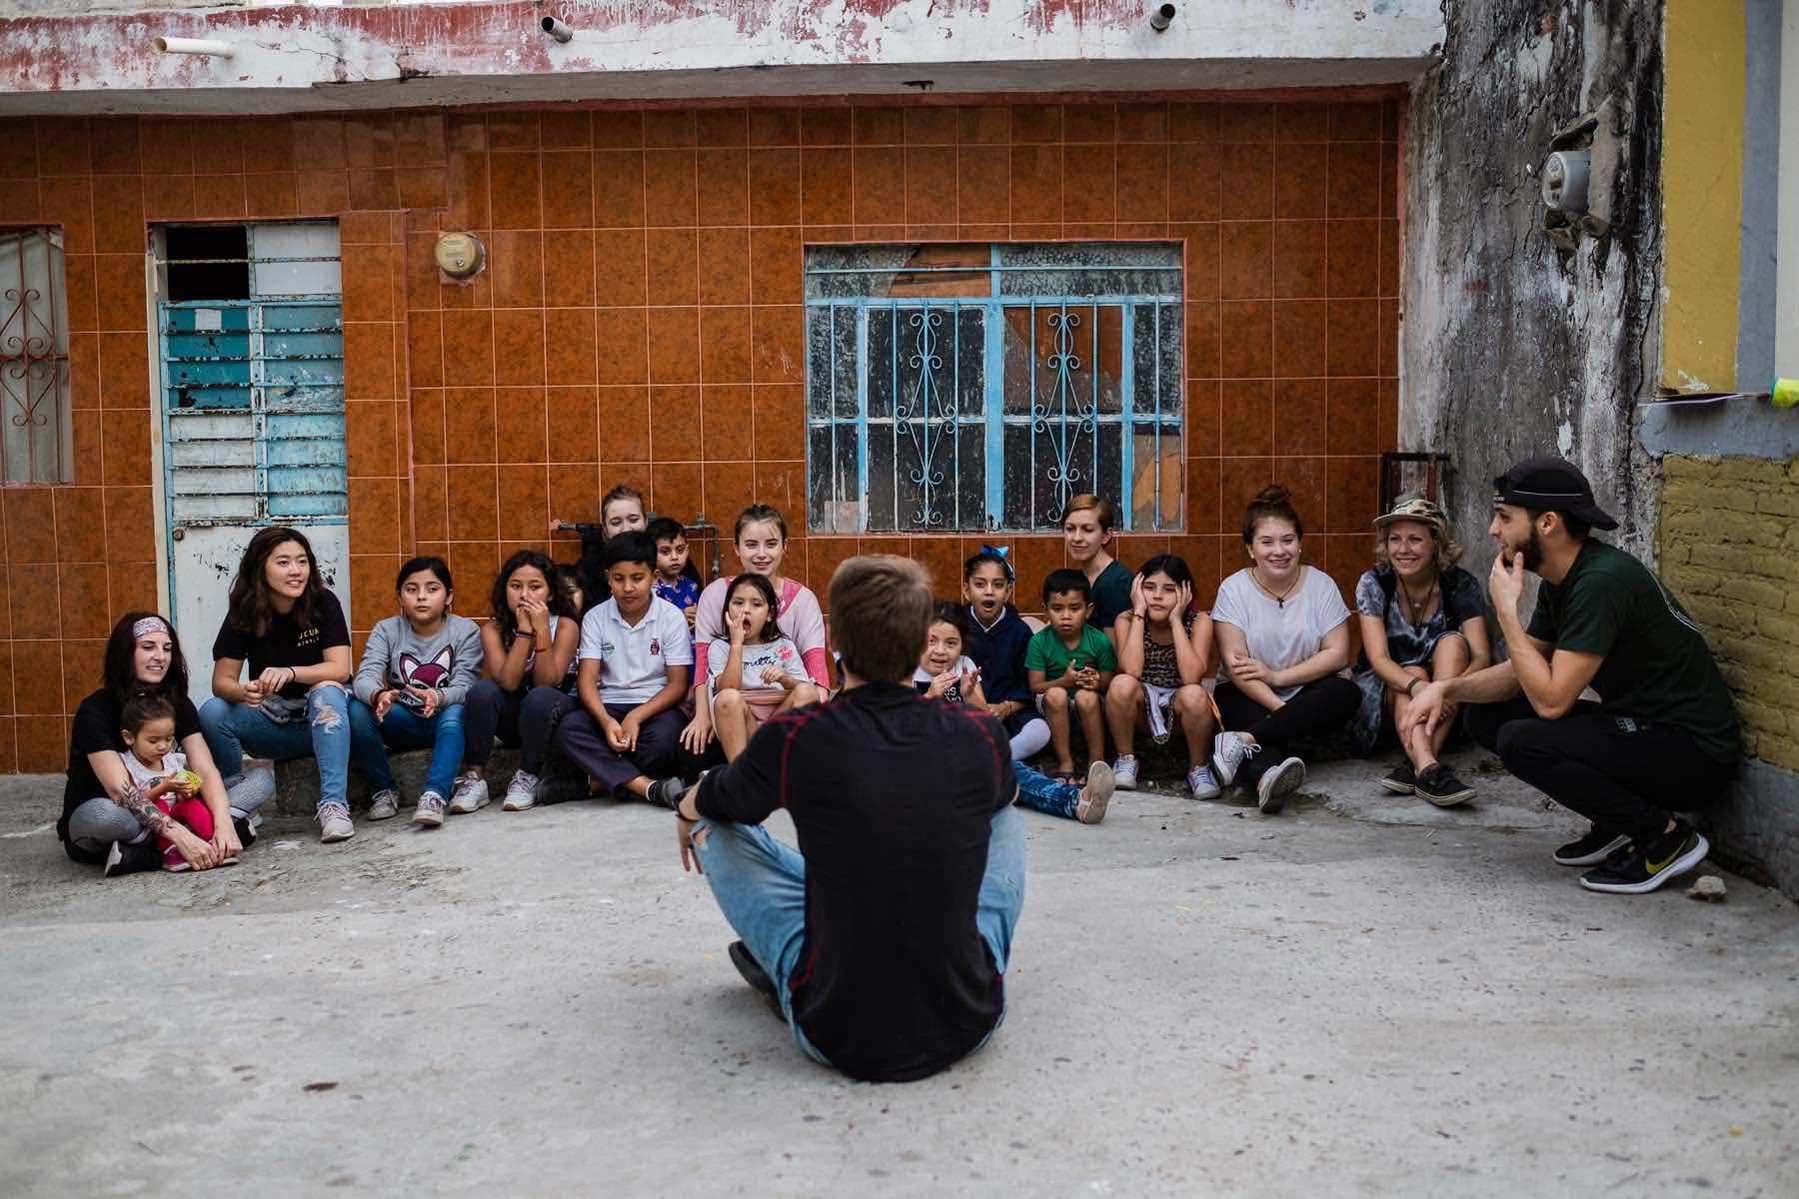 Young YWAM missionary speaking to a group of children while doing ministry in Mexico